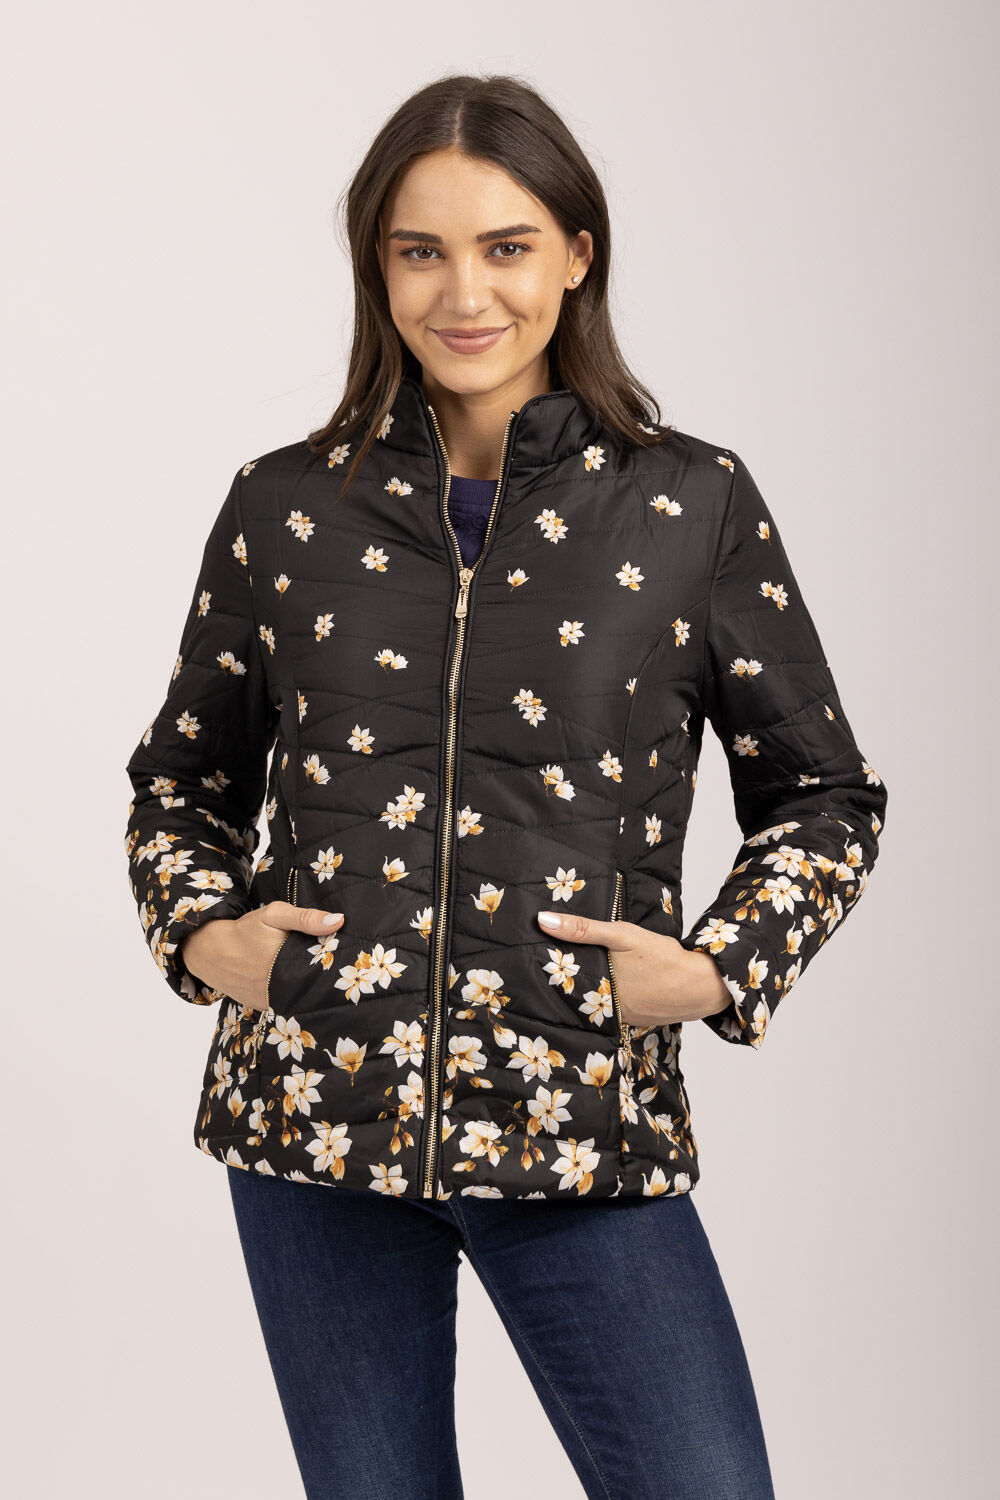 Mudflower Yellow - Floral Quilted Jacket, Size: L